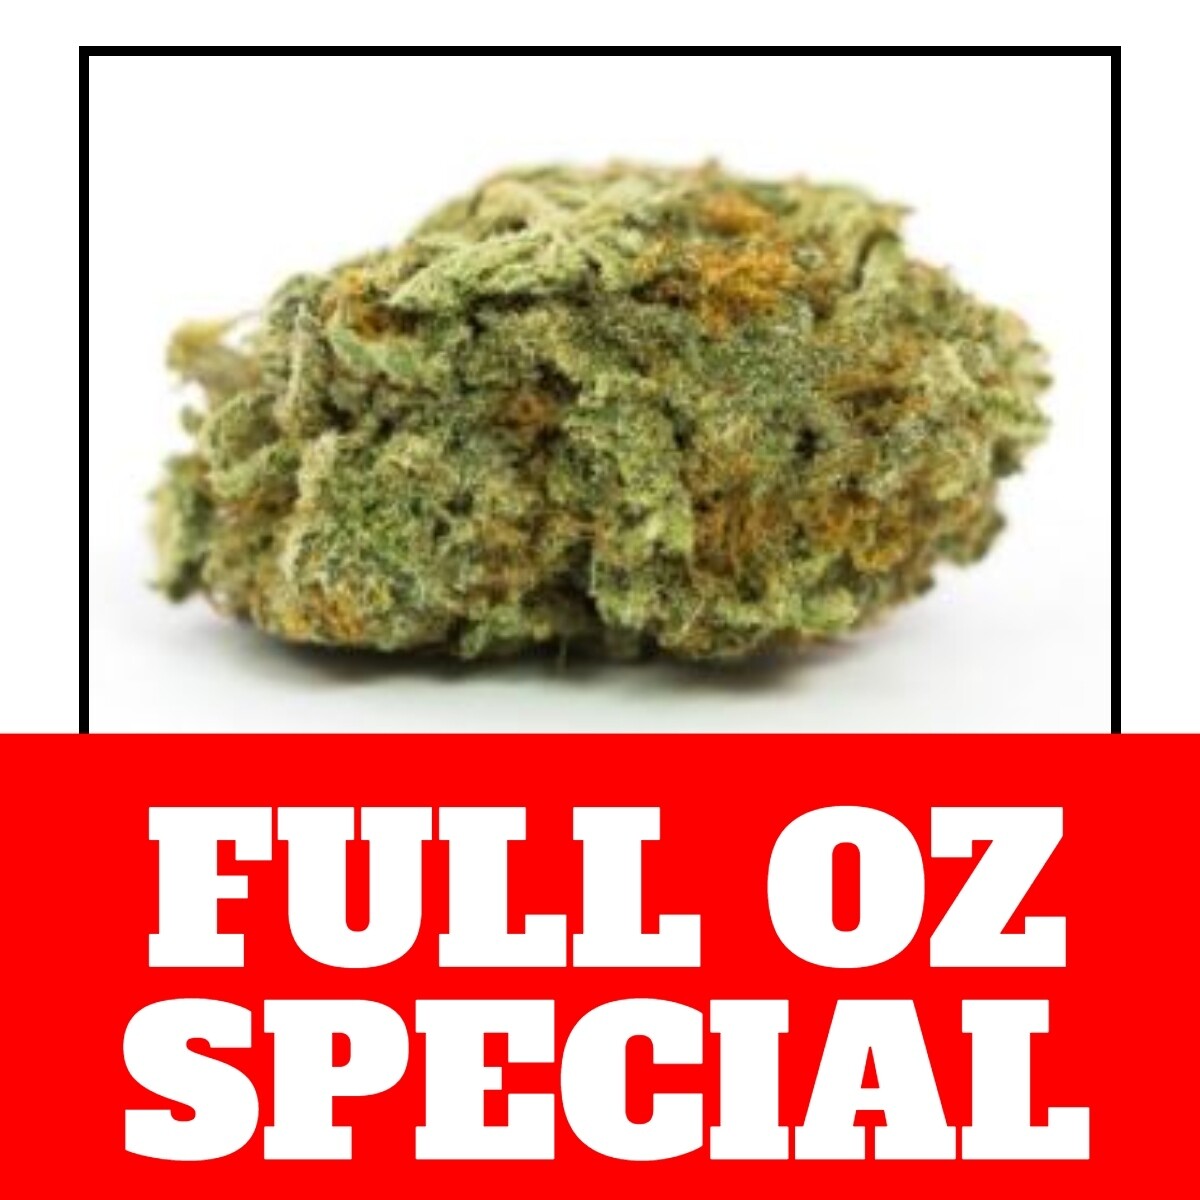 FULL OUNCE SPECIAL! $100 (LIMITED SUPPLIES)